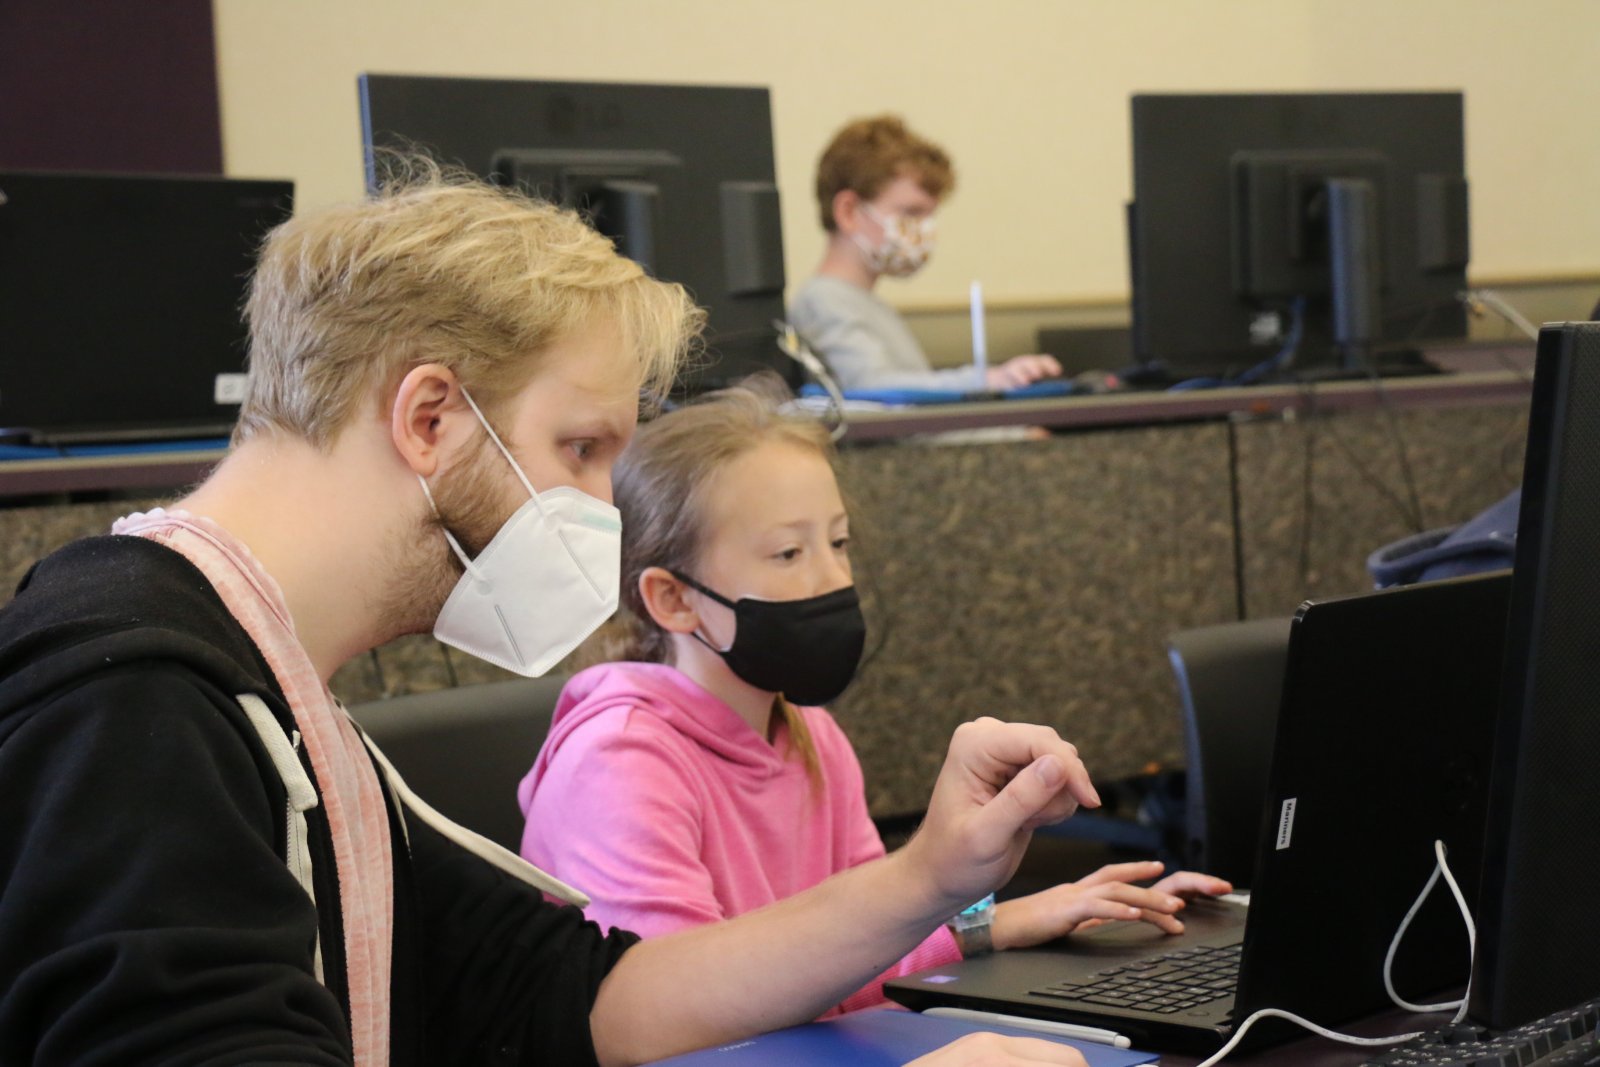 Instructor, Luke, works with a young student on a computer in Saturday Academy’s Animation Adventure summer camp